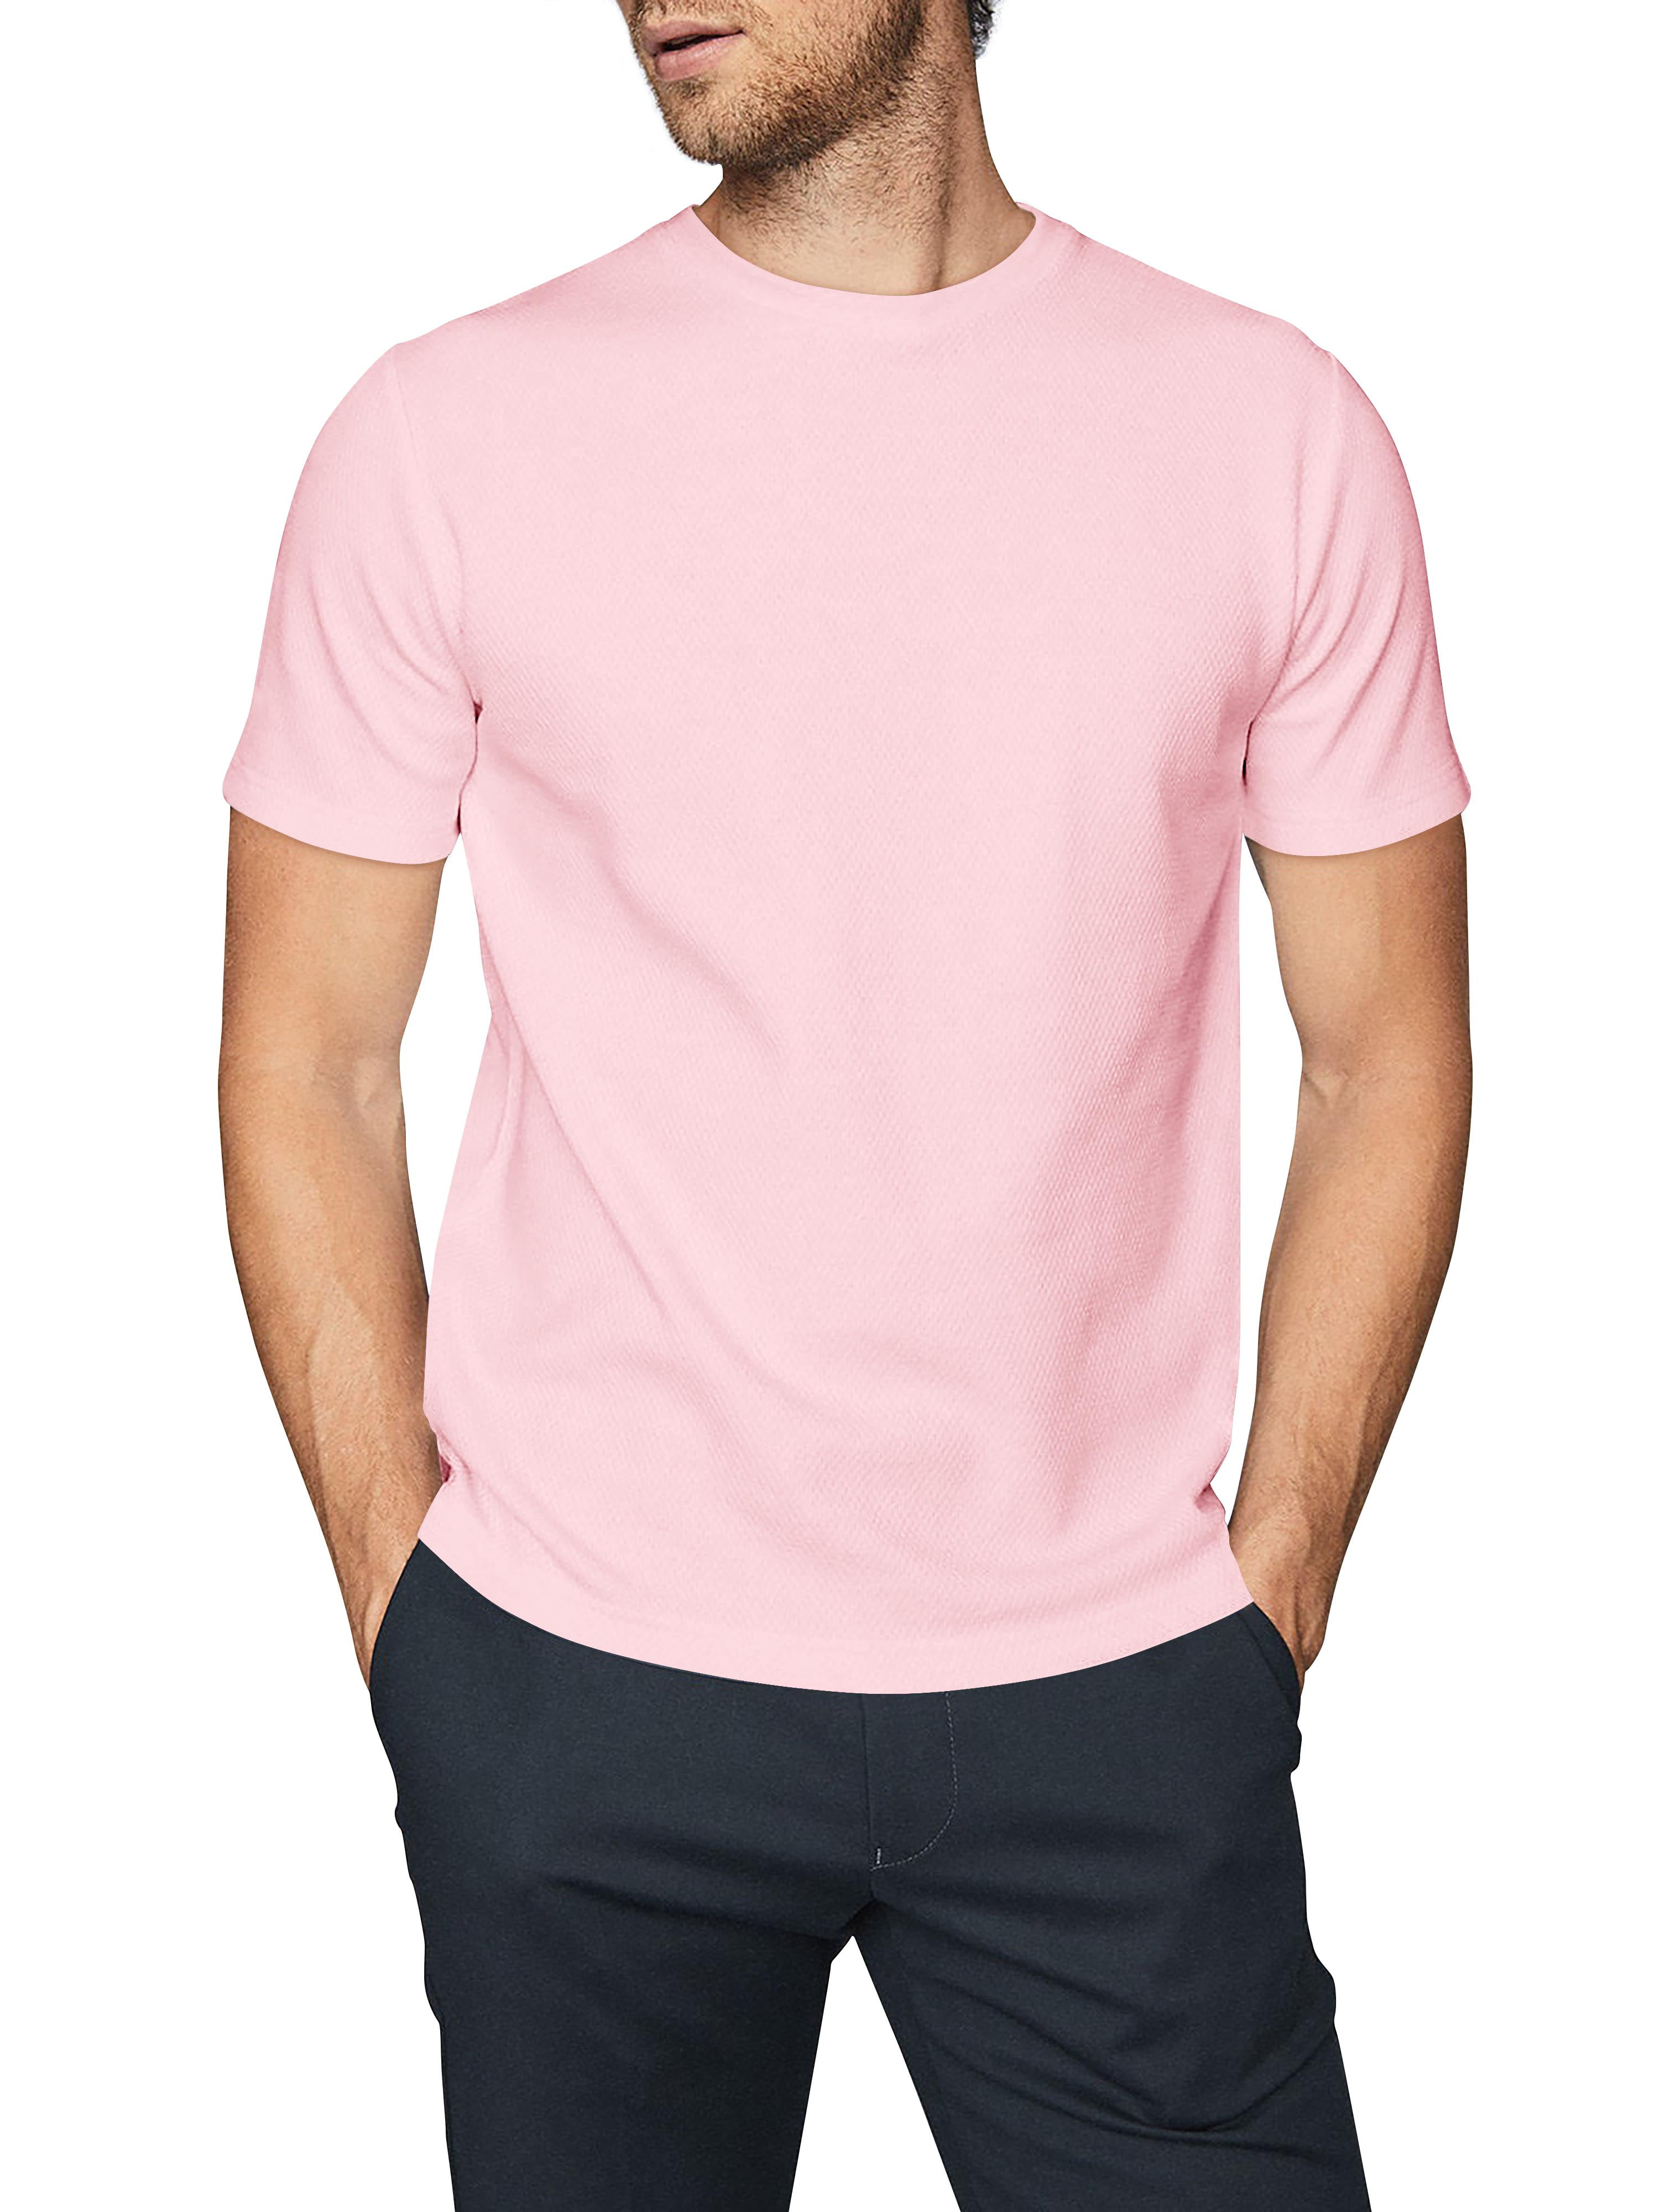 Men's Tops Details about   Fruit of the Loom Short Sleeve Baseball Cotton Crew Neck t-shirt 